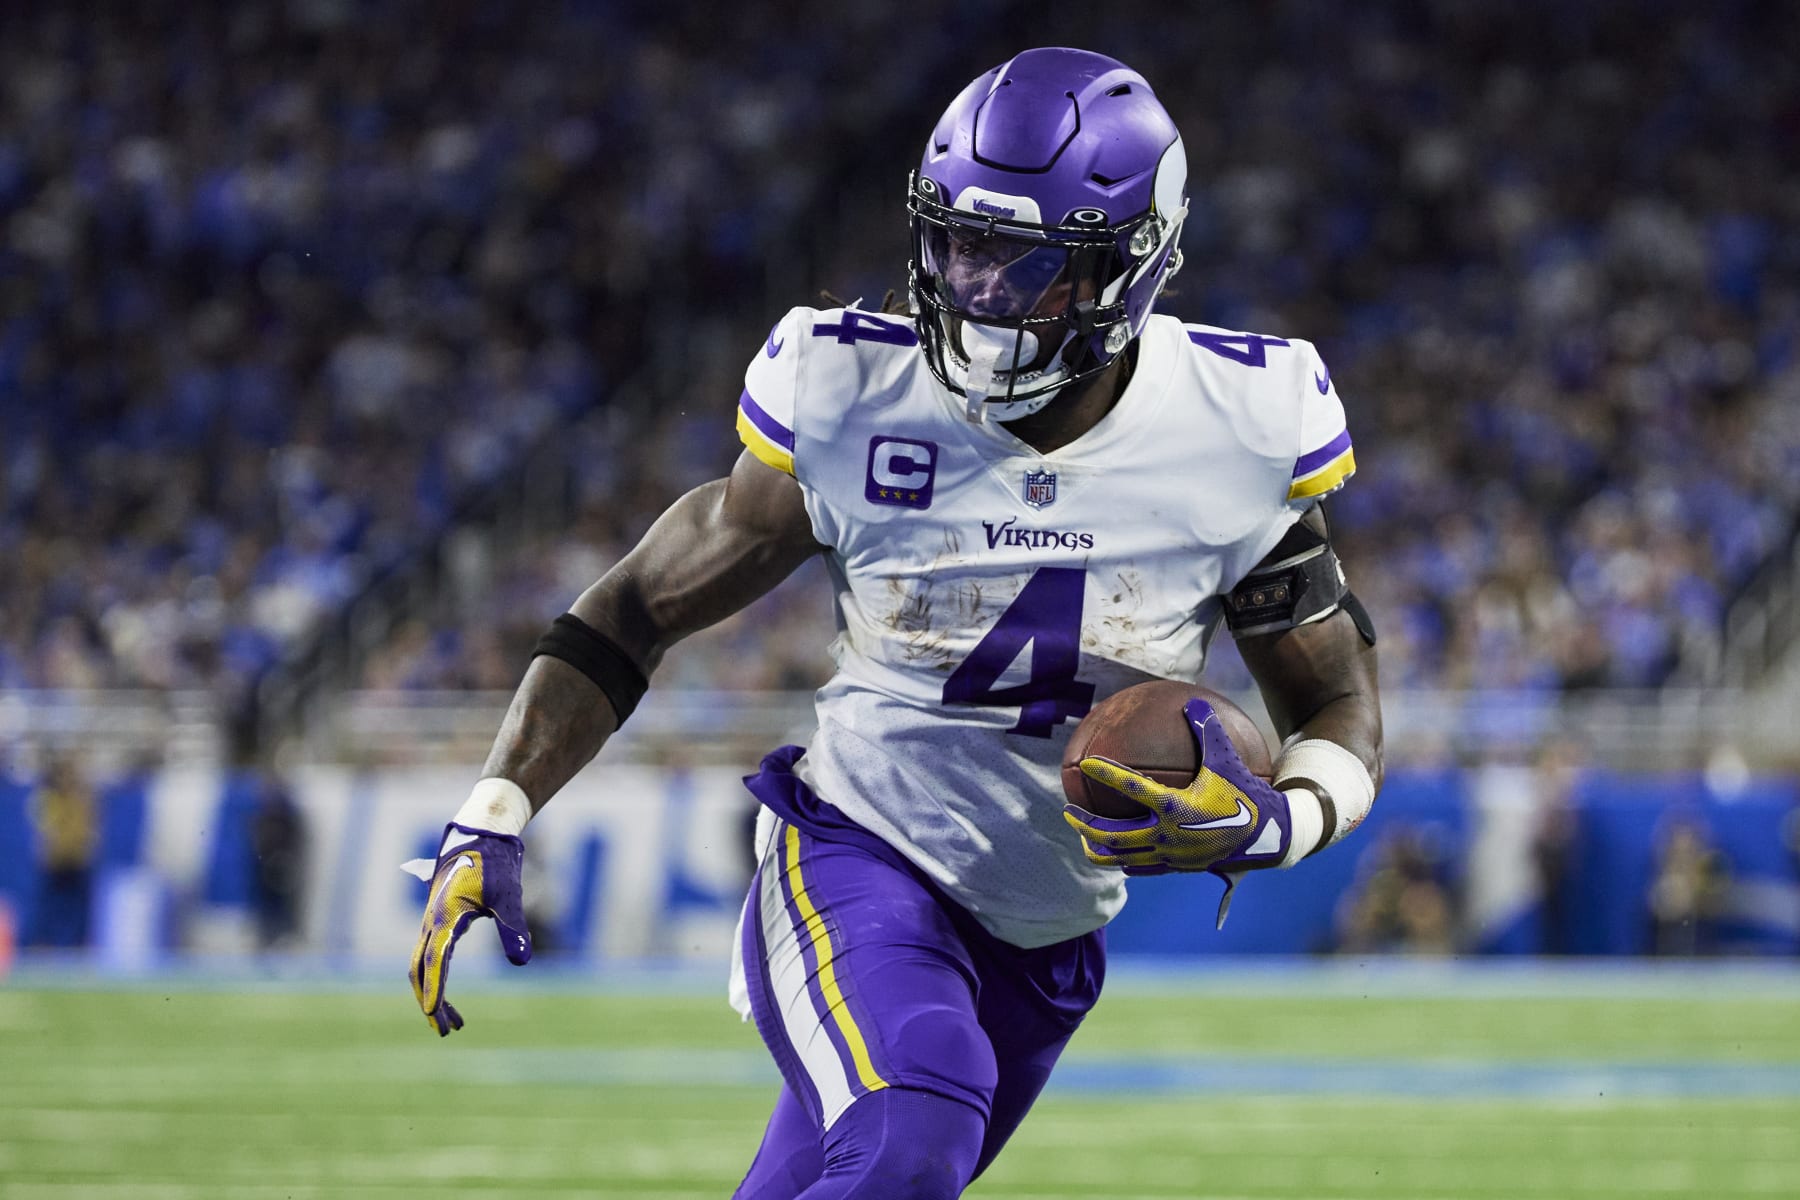 \ud83d\udea8 Breaking News: Vikings RB Dalvin Cook to visit the Jets ...